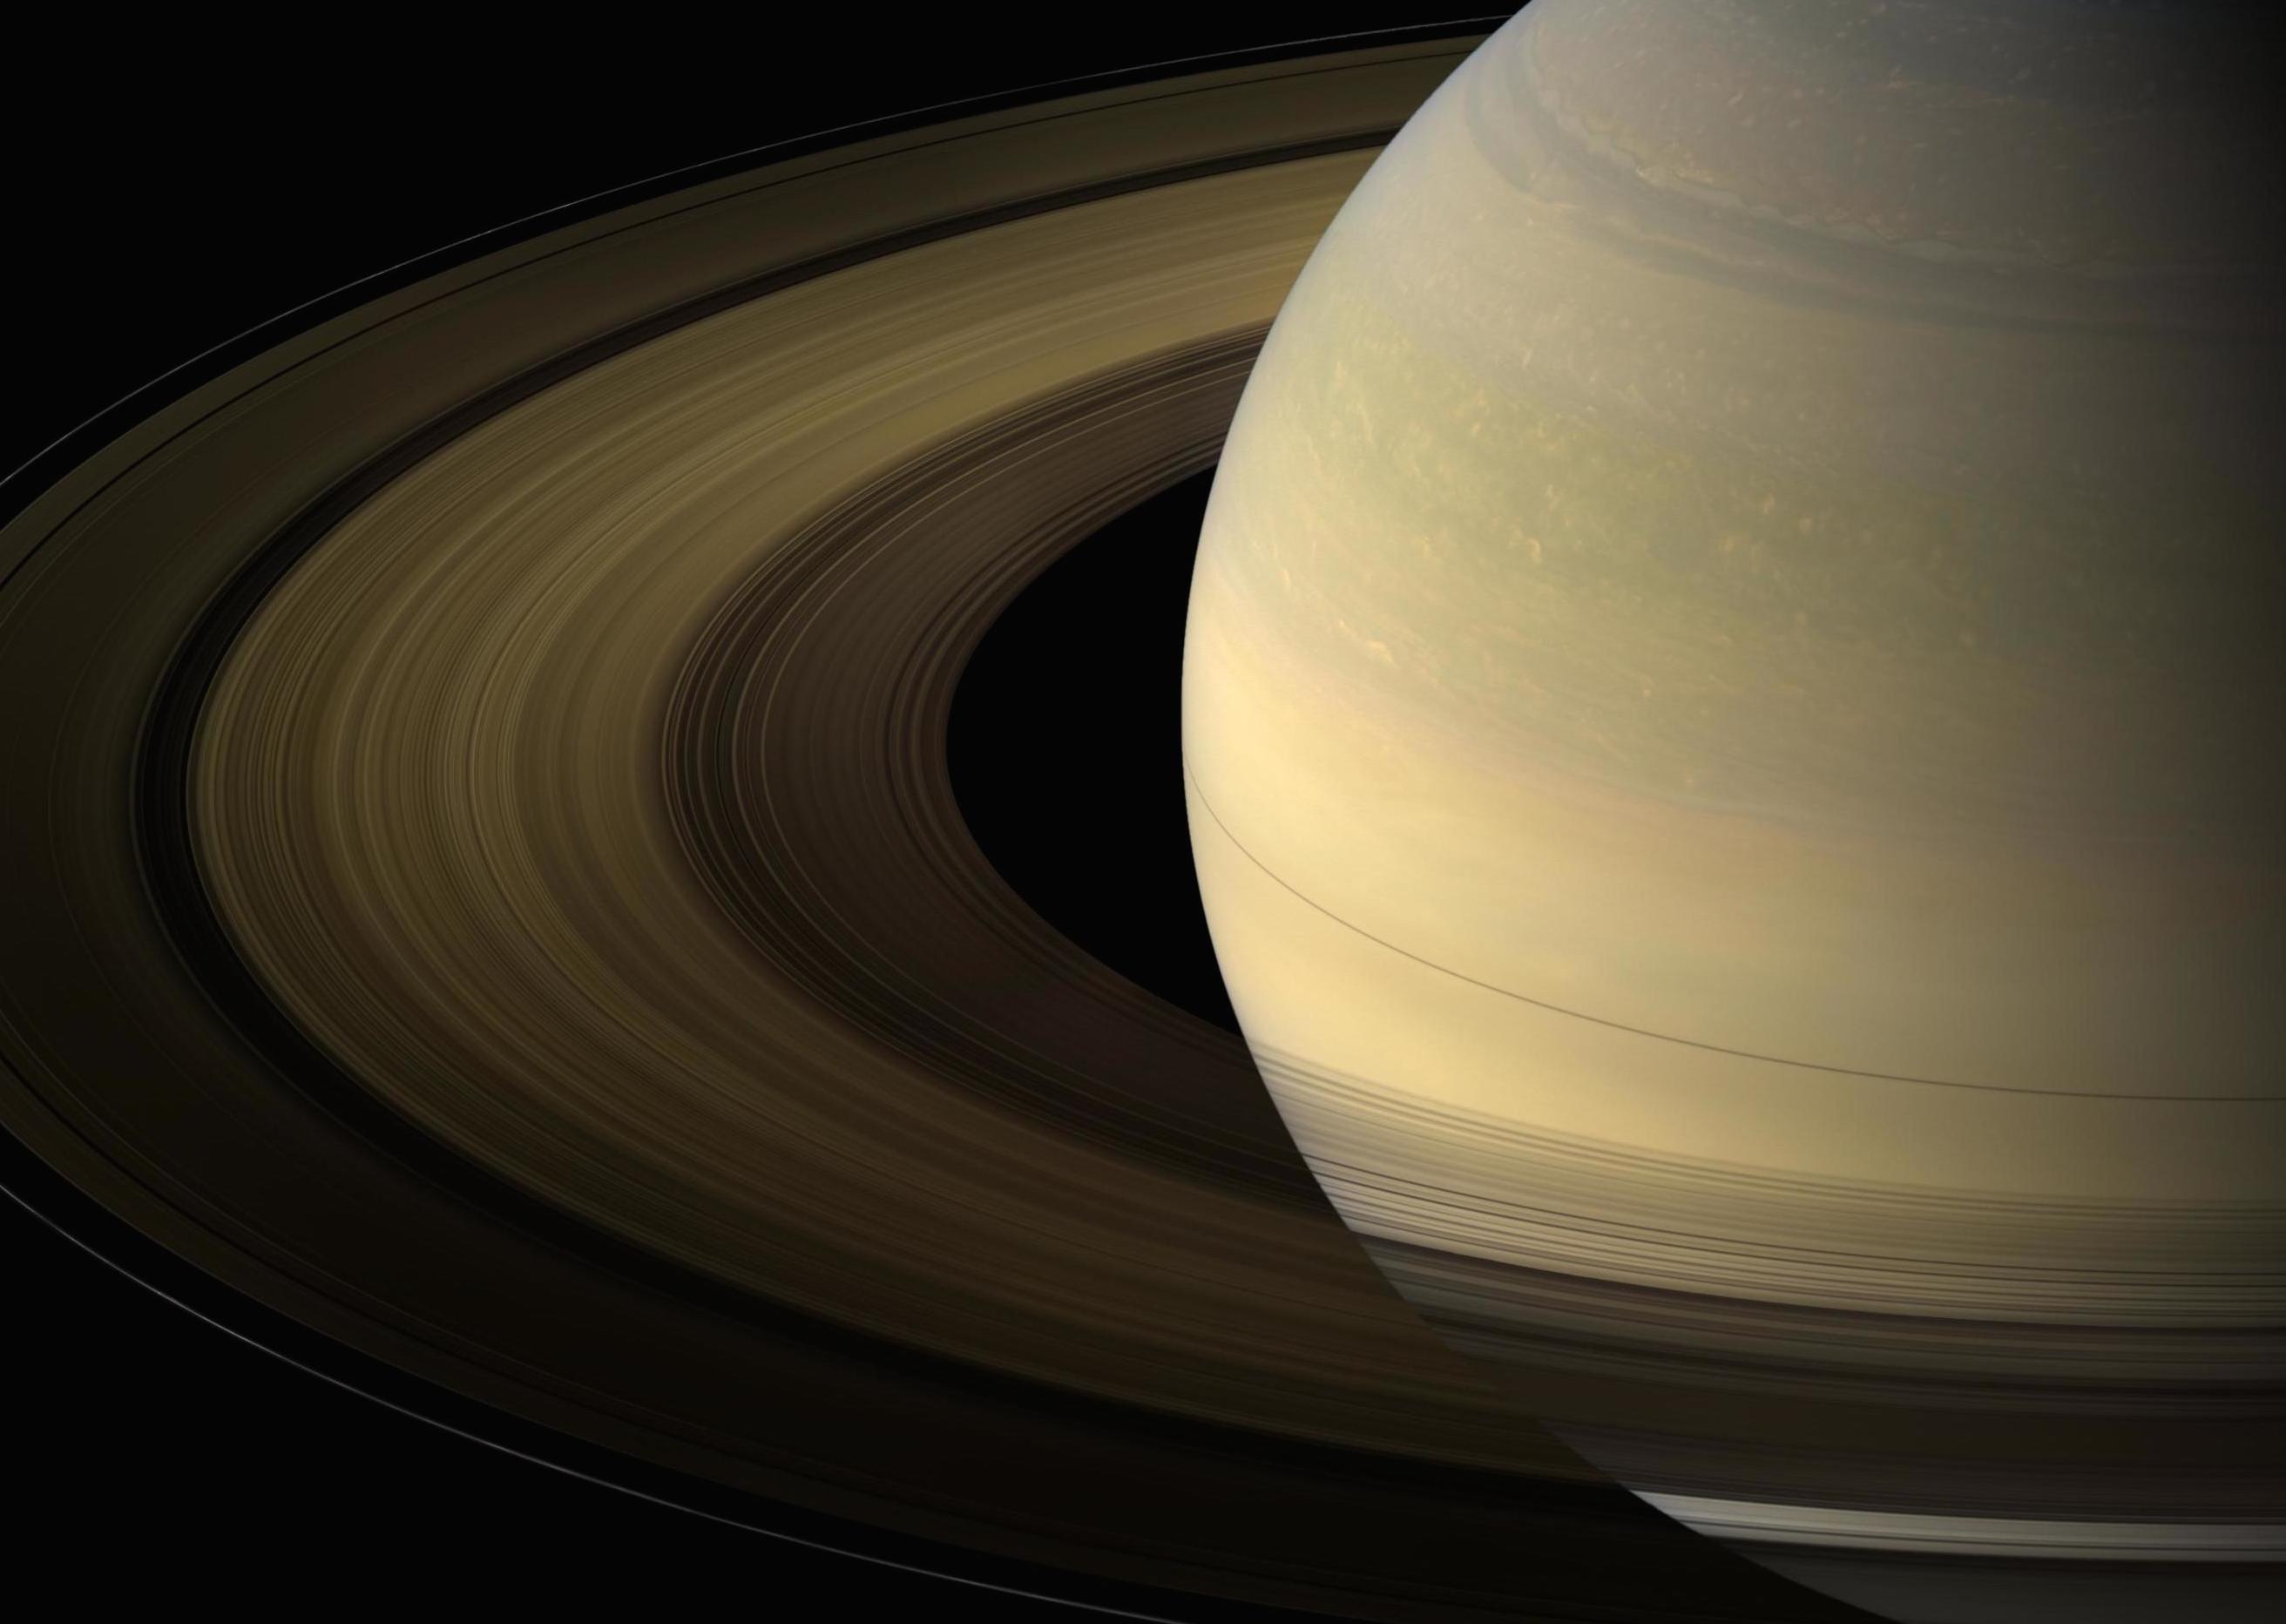 Color image showing a side view of Saturn and its rings.